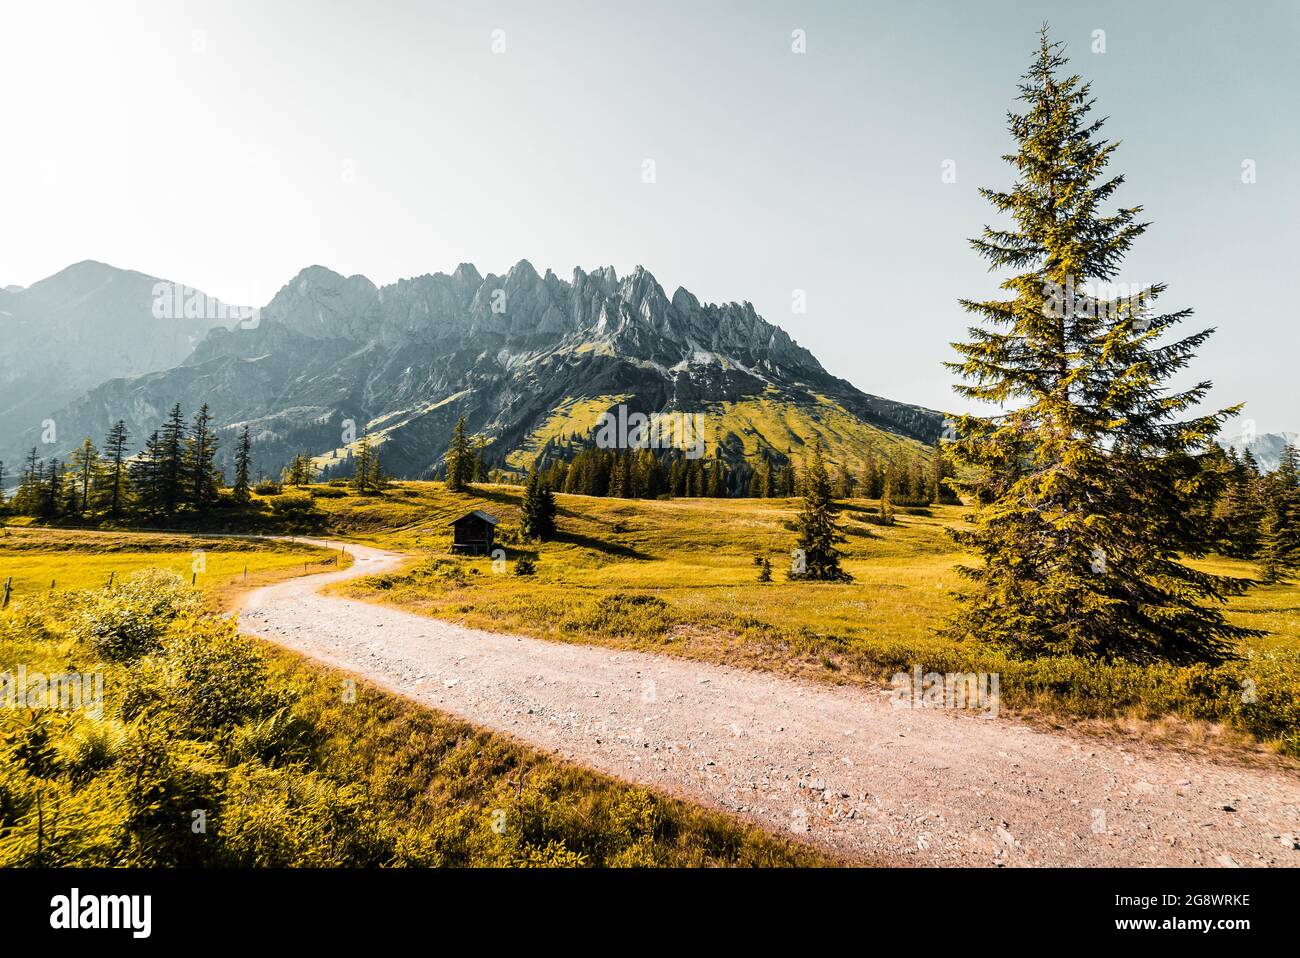 Amazing photography by Lukas Klima in the mountains for wallpapers as well as commercials and flyers. Best photography for all your needs. Stock Photo